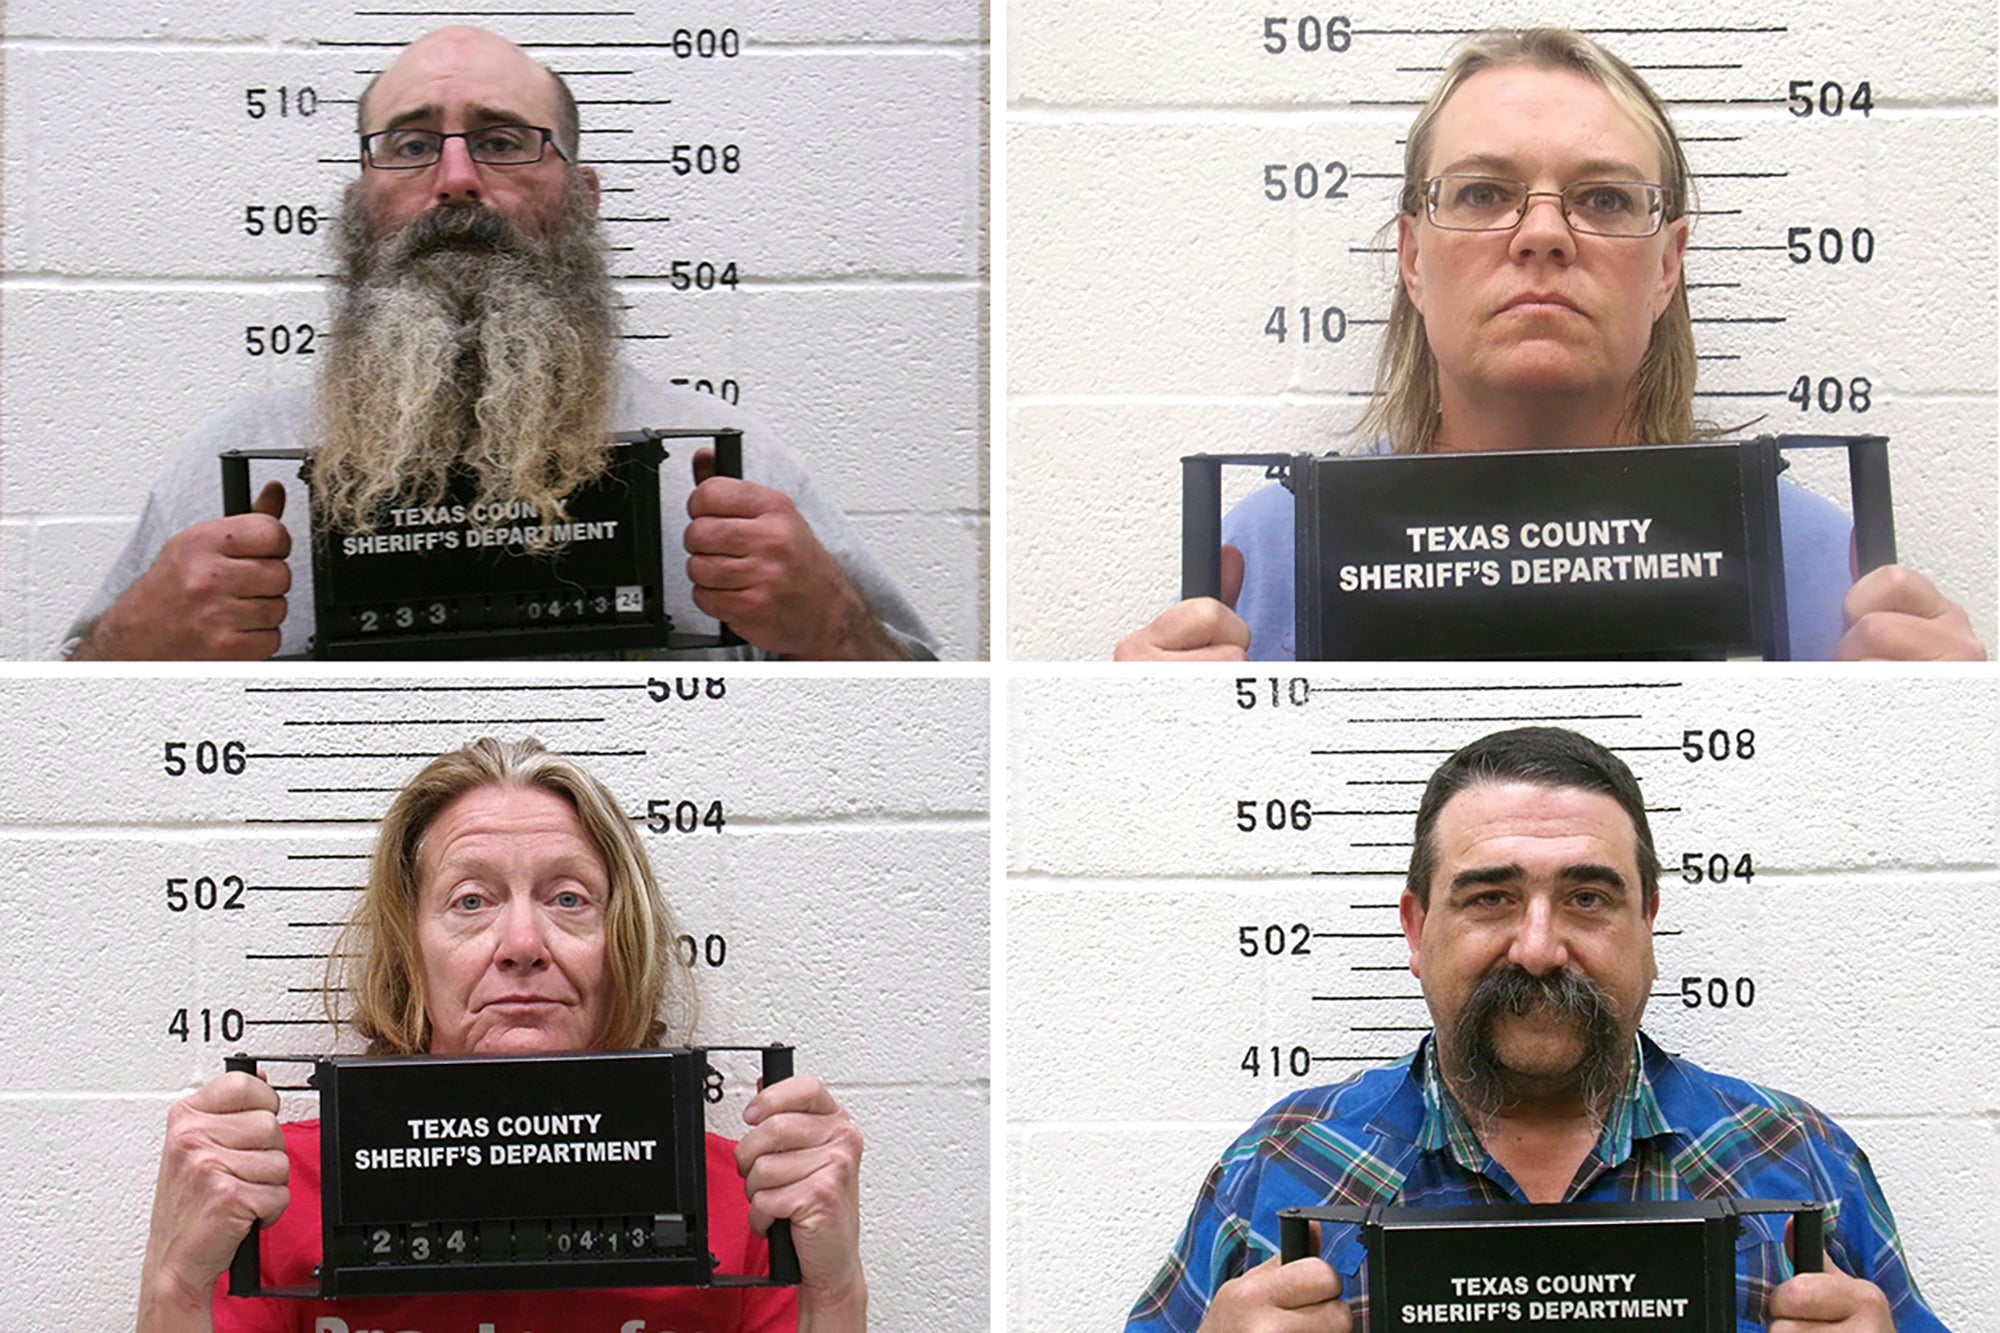 Clockwise from top left: Tad Bert Cullum, 43, Cora Twombly, 44, Cole Earl Twombly, 50, and Tifany Machel Adams, 54, were arrested and charged with murder this weekend. They are due in court this week